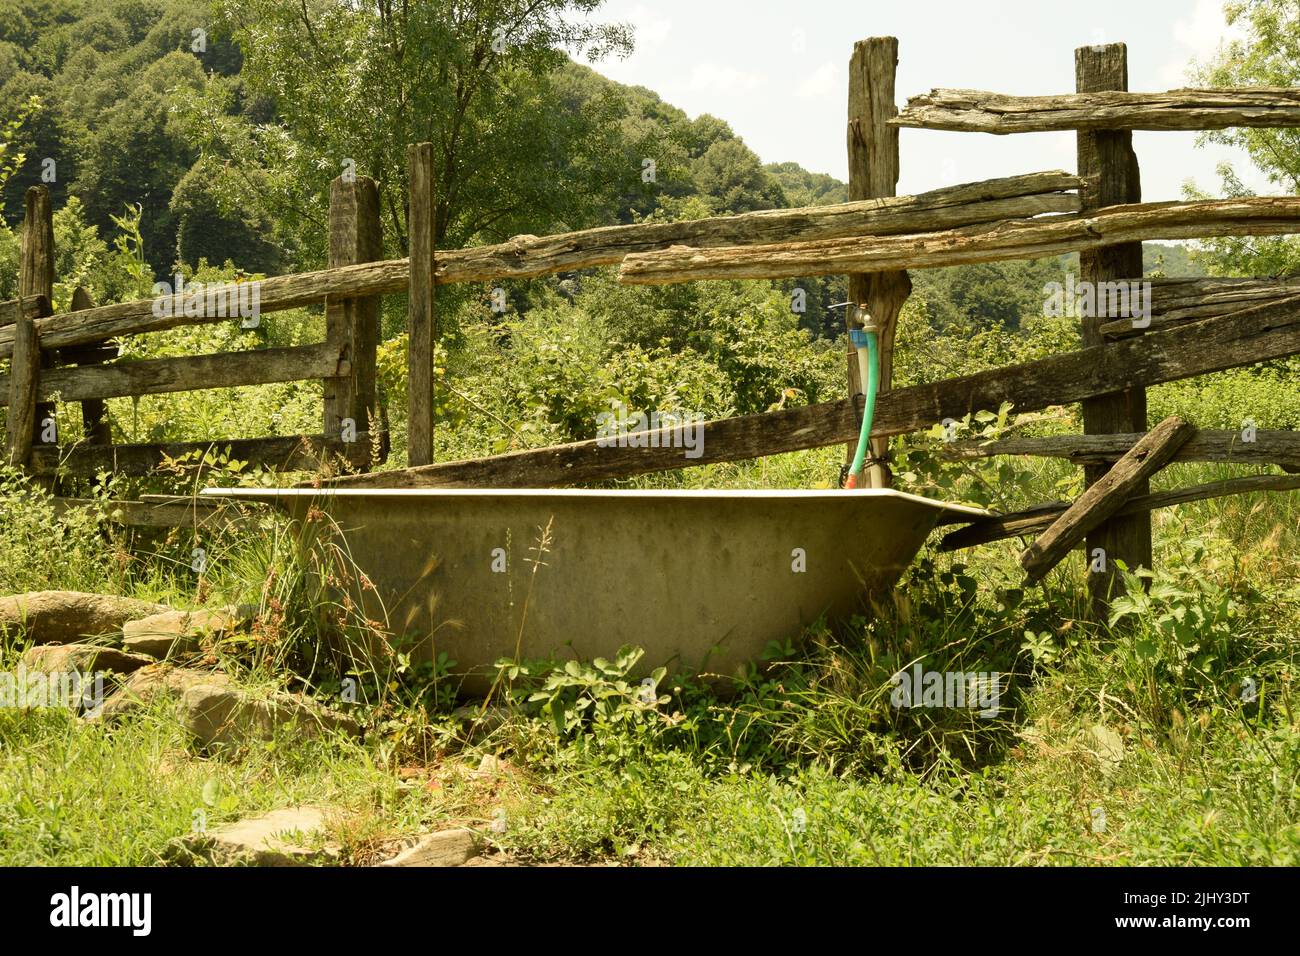 An old bathub outdoors, recycled as a drinking trough for cattle in the countryside, in a beautiful natural landscape of greenery, on a sunny day Stock Photo